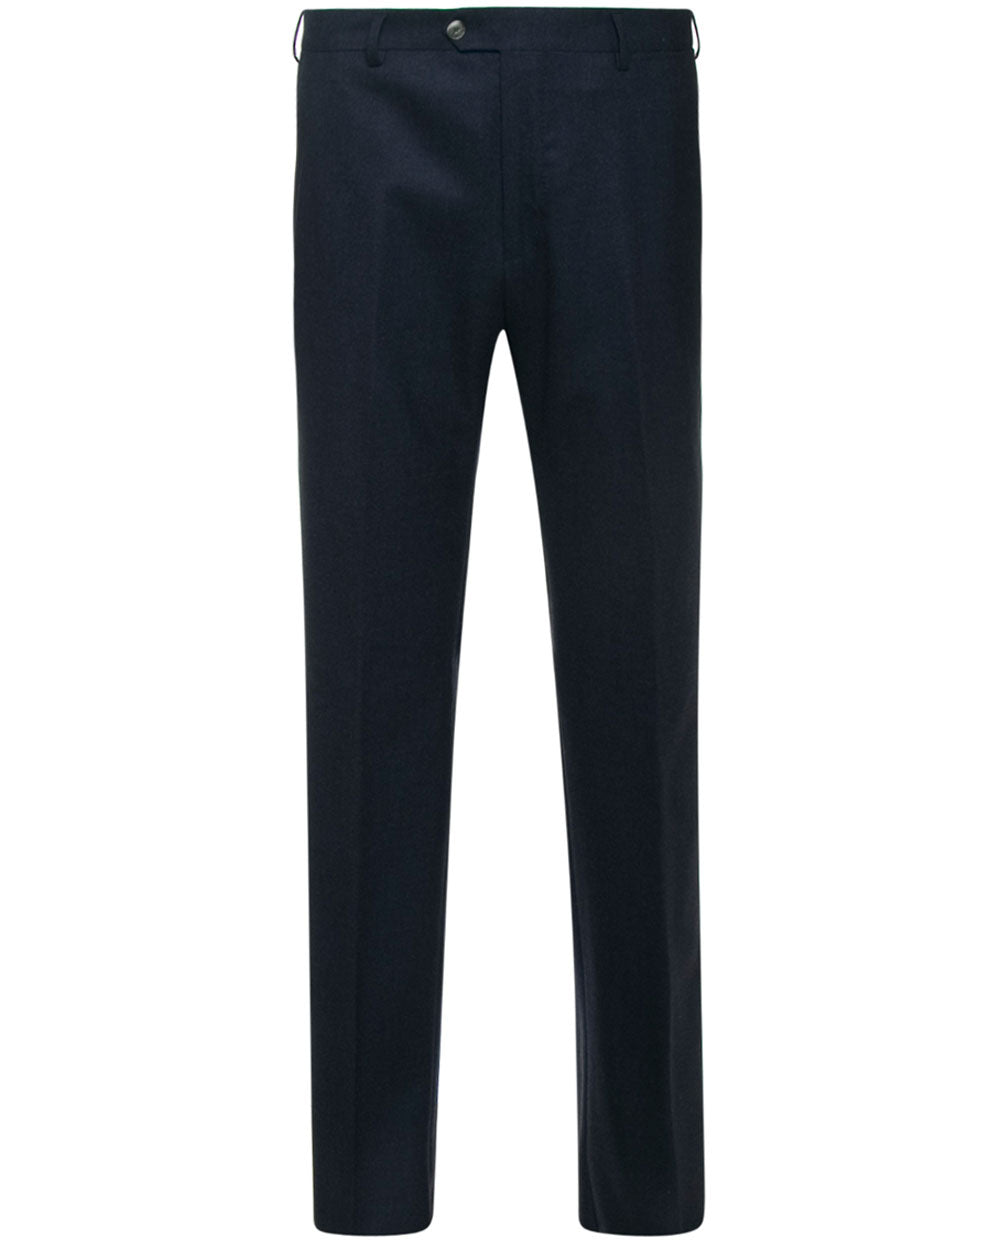 Cashmere Dress Pant in Navy